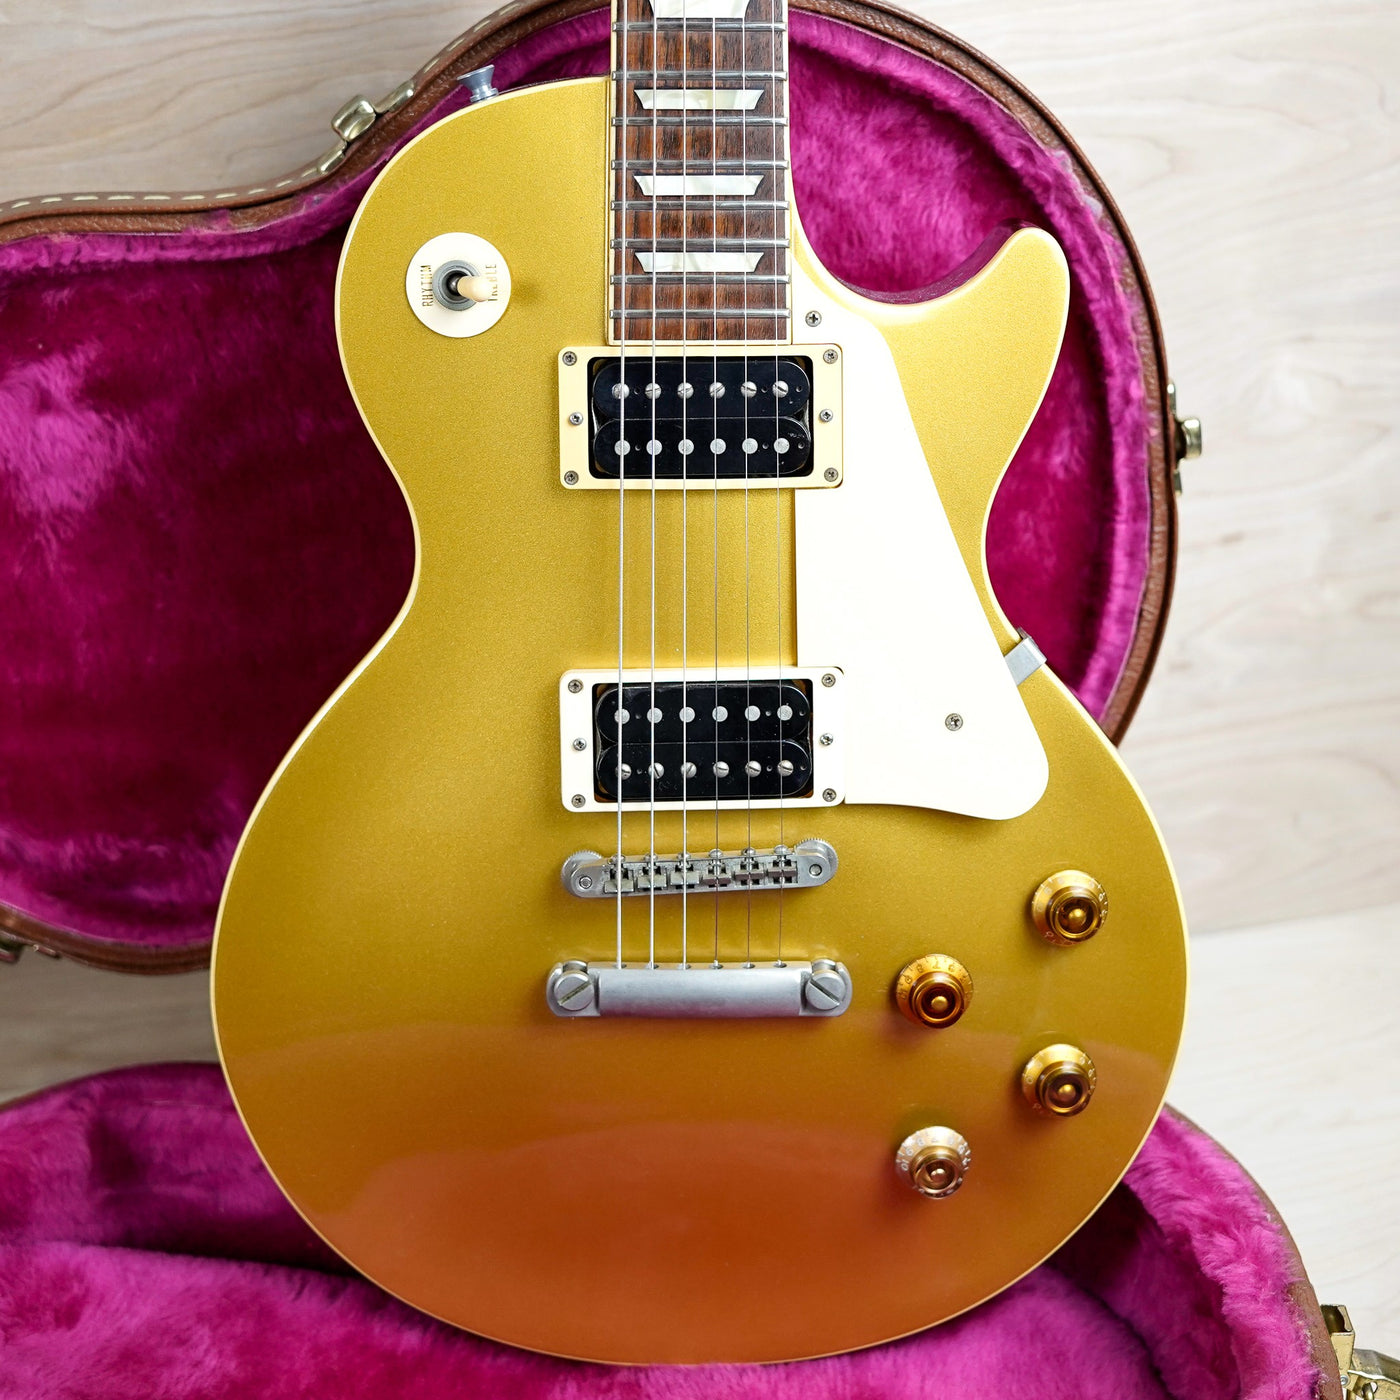 Epiphone LPS-80 Les Paul Standard 1998 Goldtop with Open Book